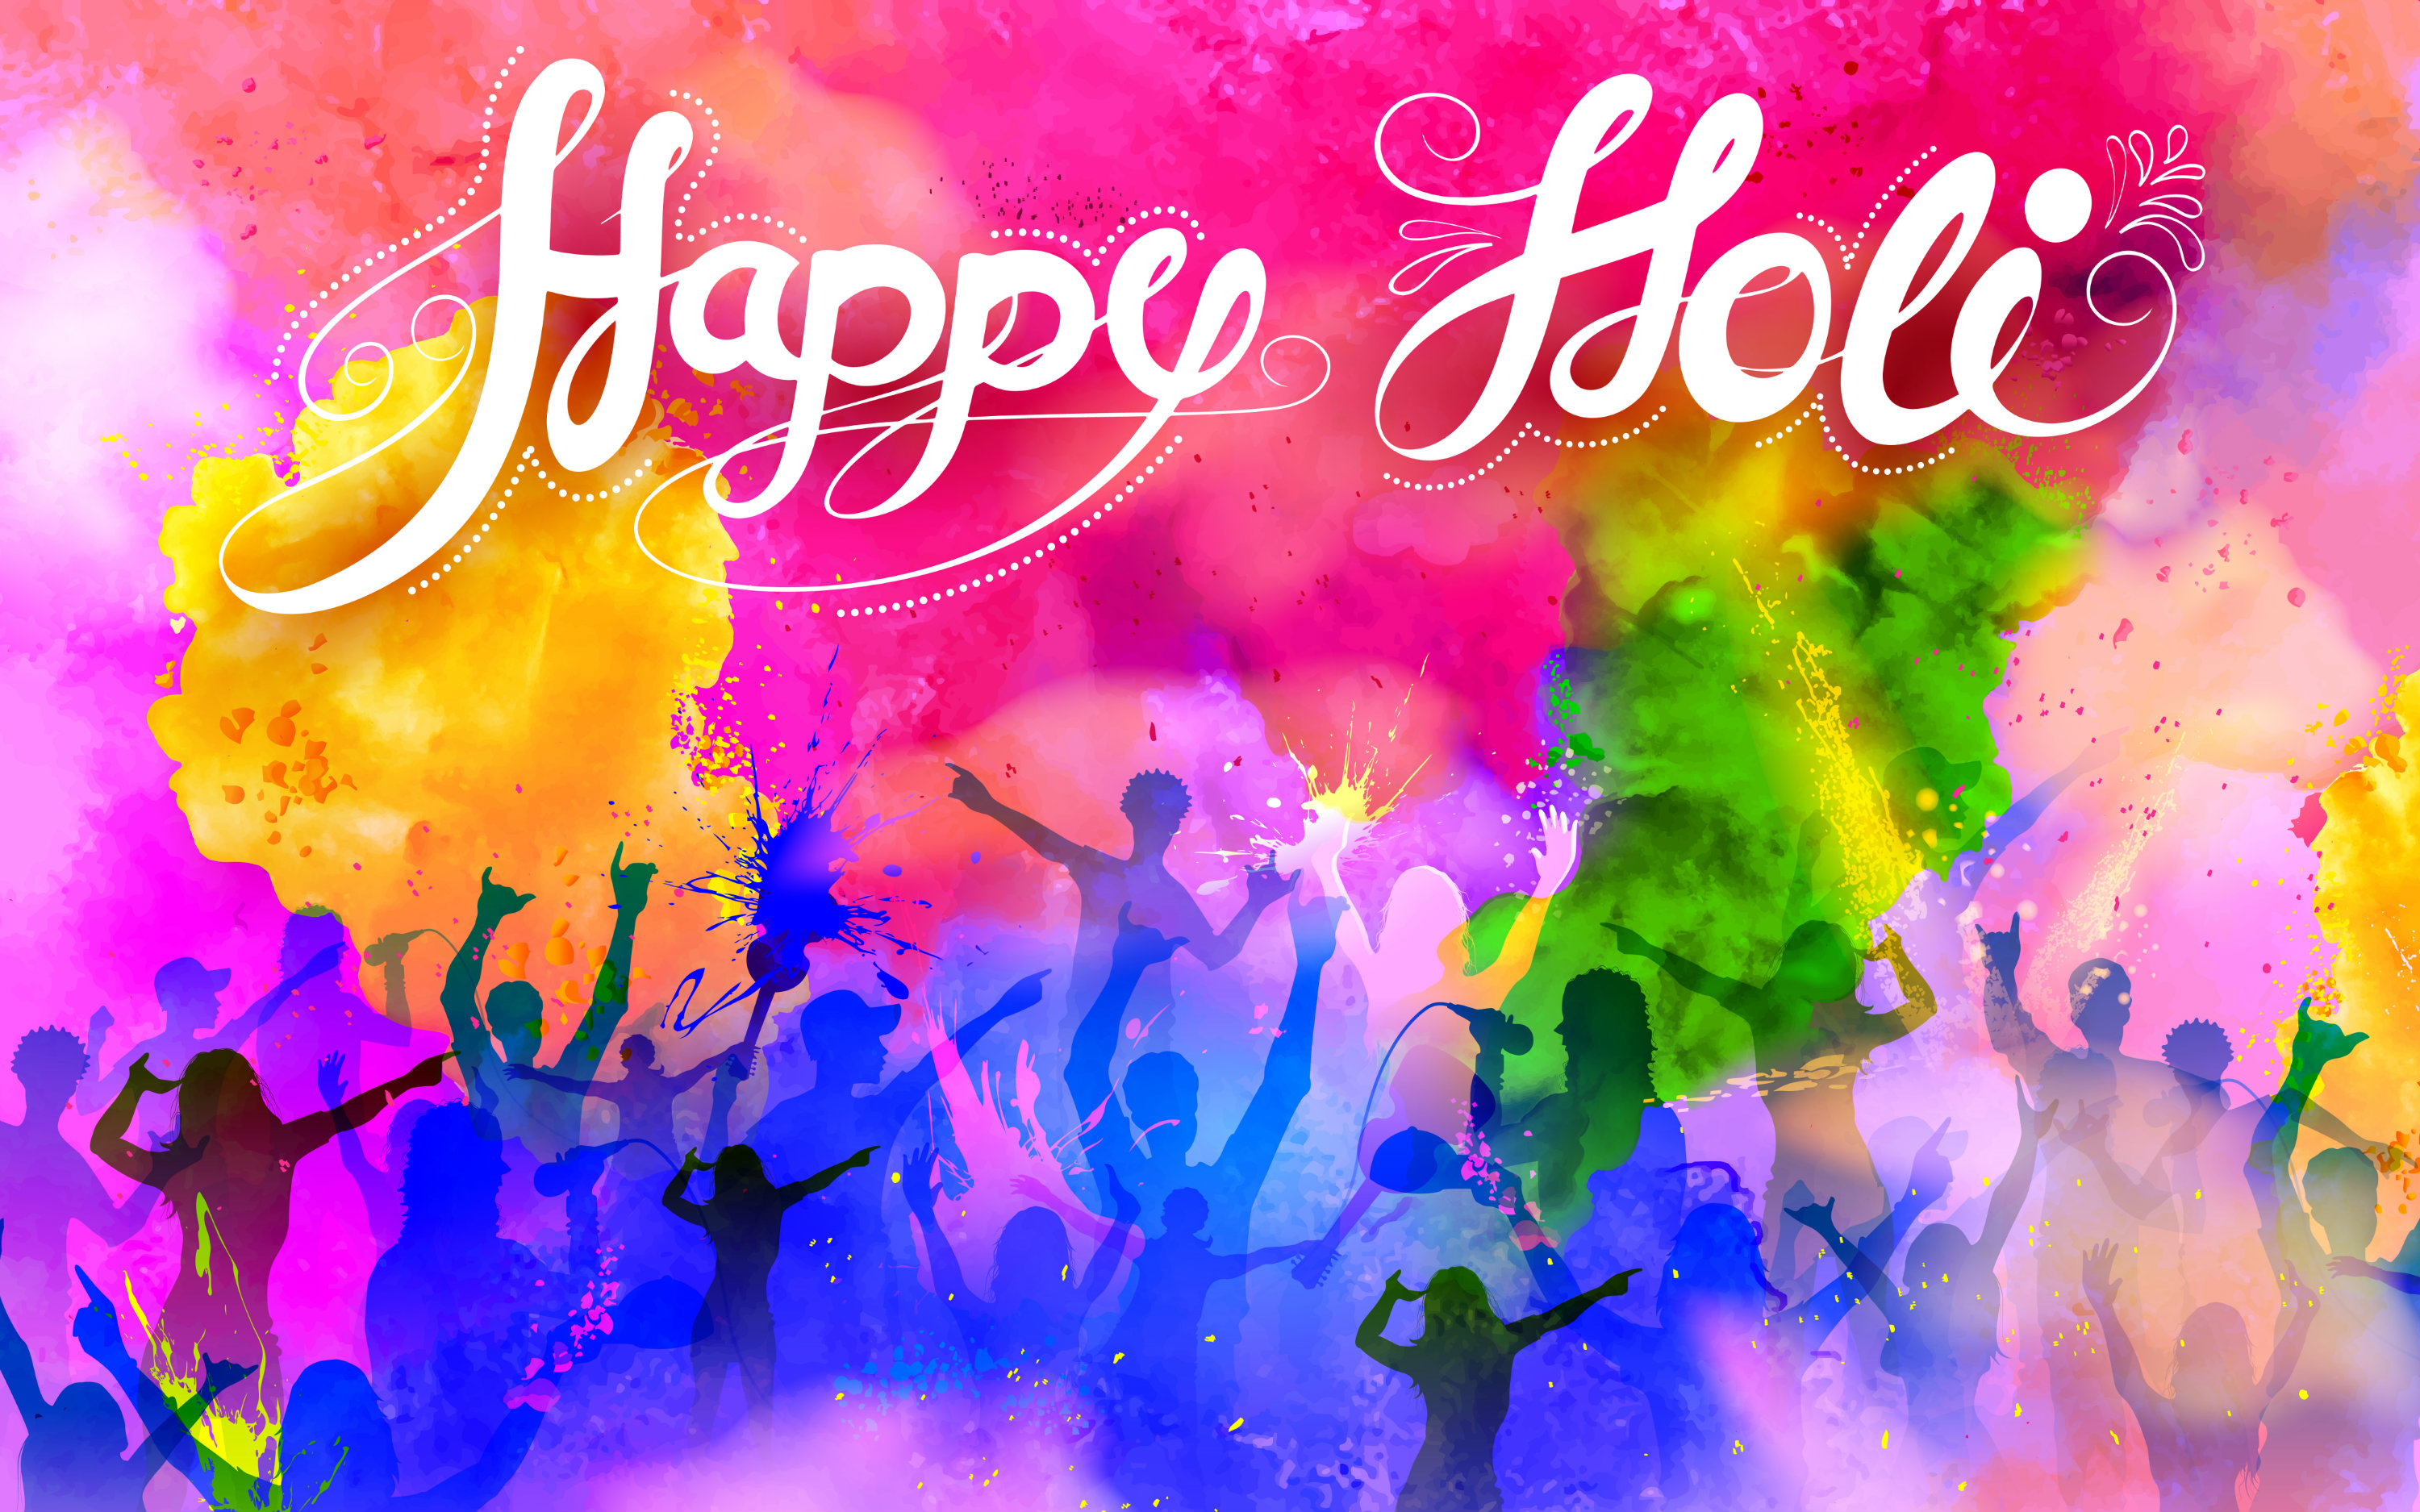 Download Free Hd Wallpapers Of Holi